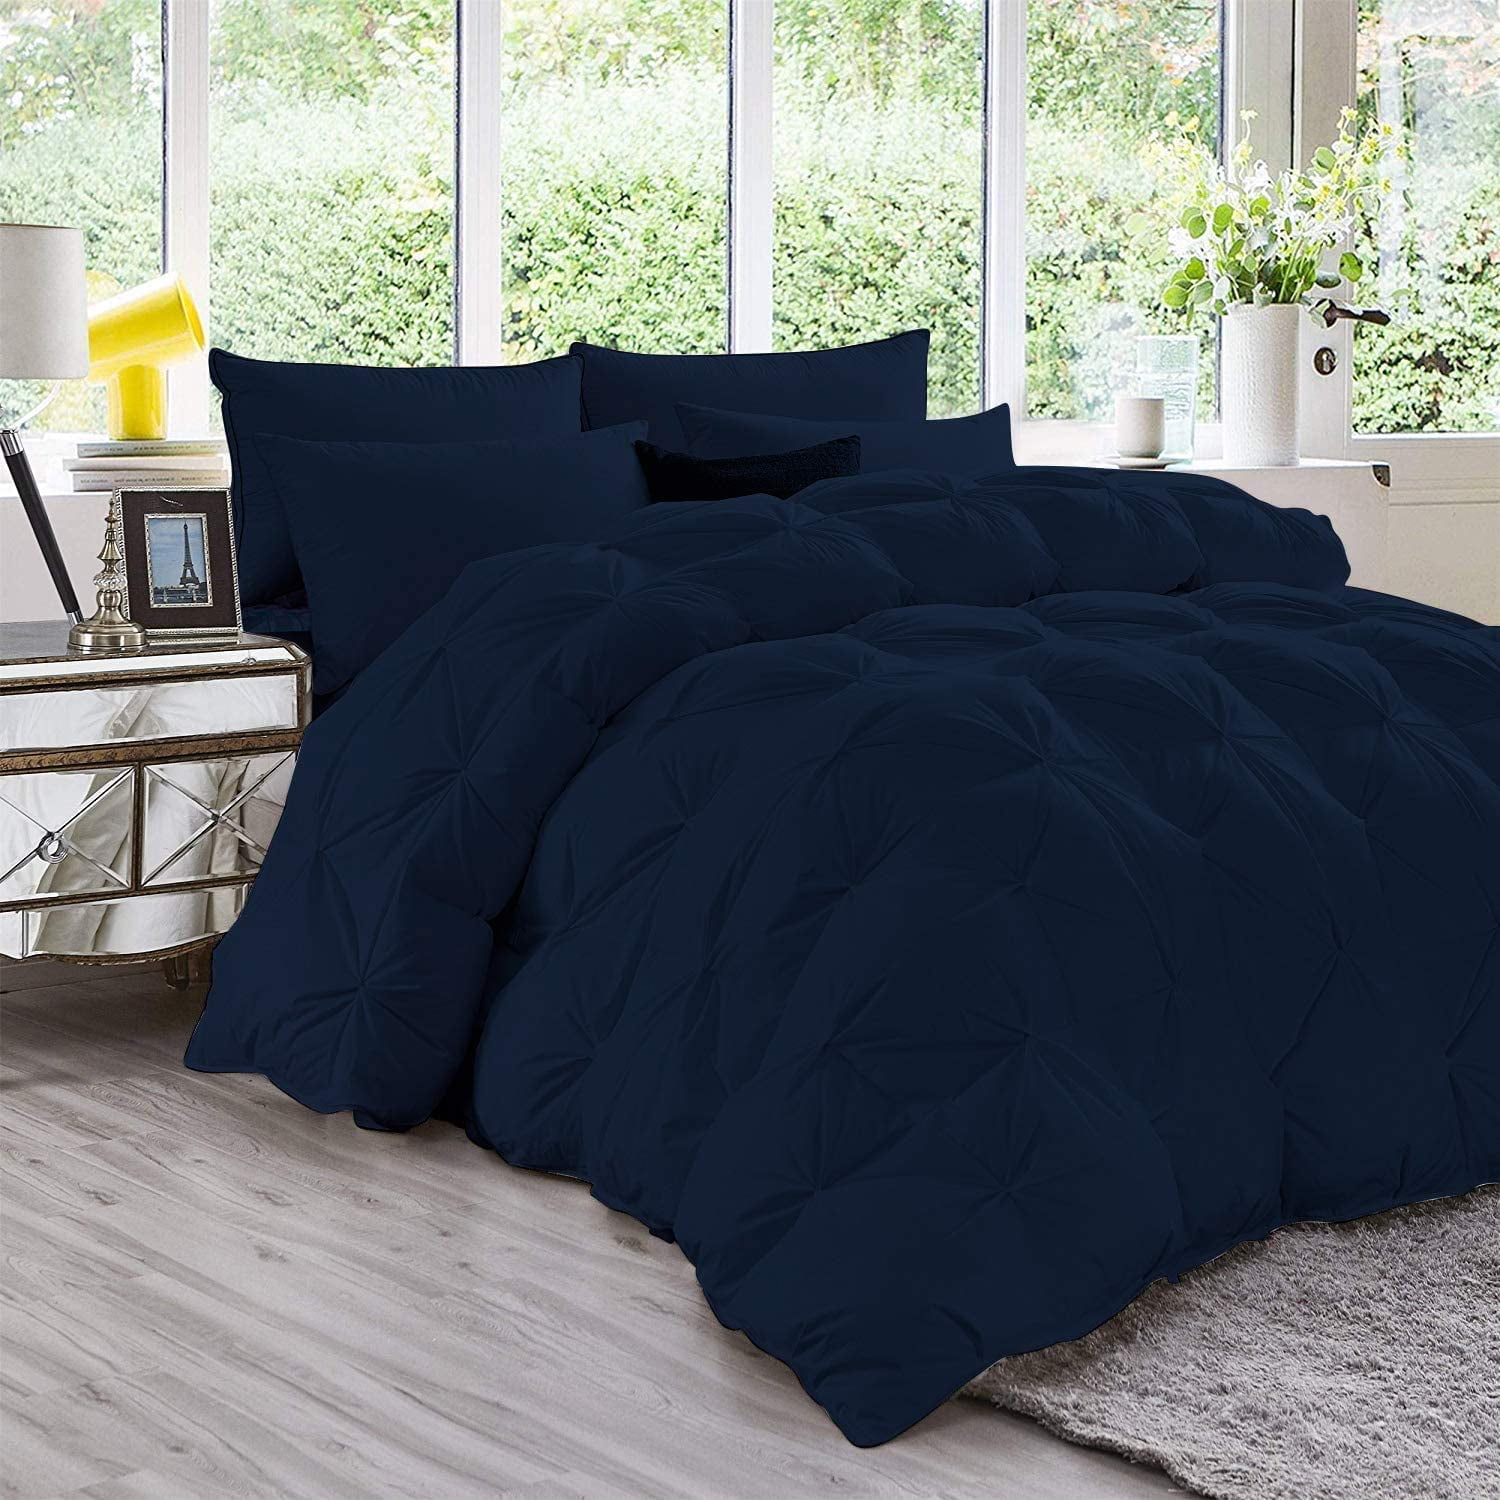  All-Season 100% Cotton Fabric 5 Piece Pinch Pleated Design  Comforter Set Cal-King/King Size